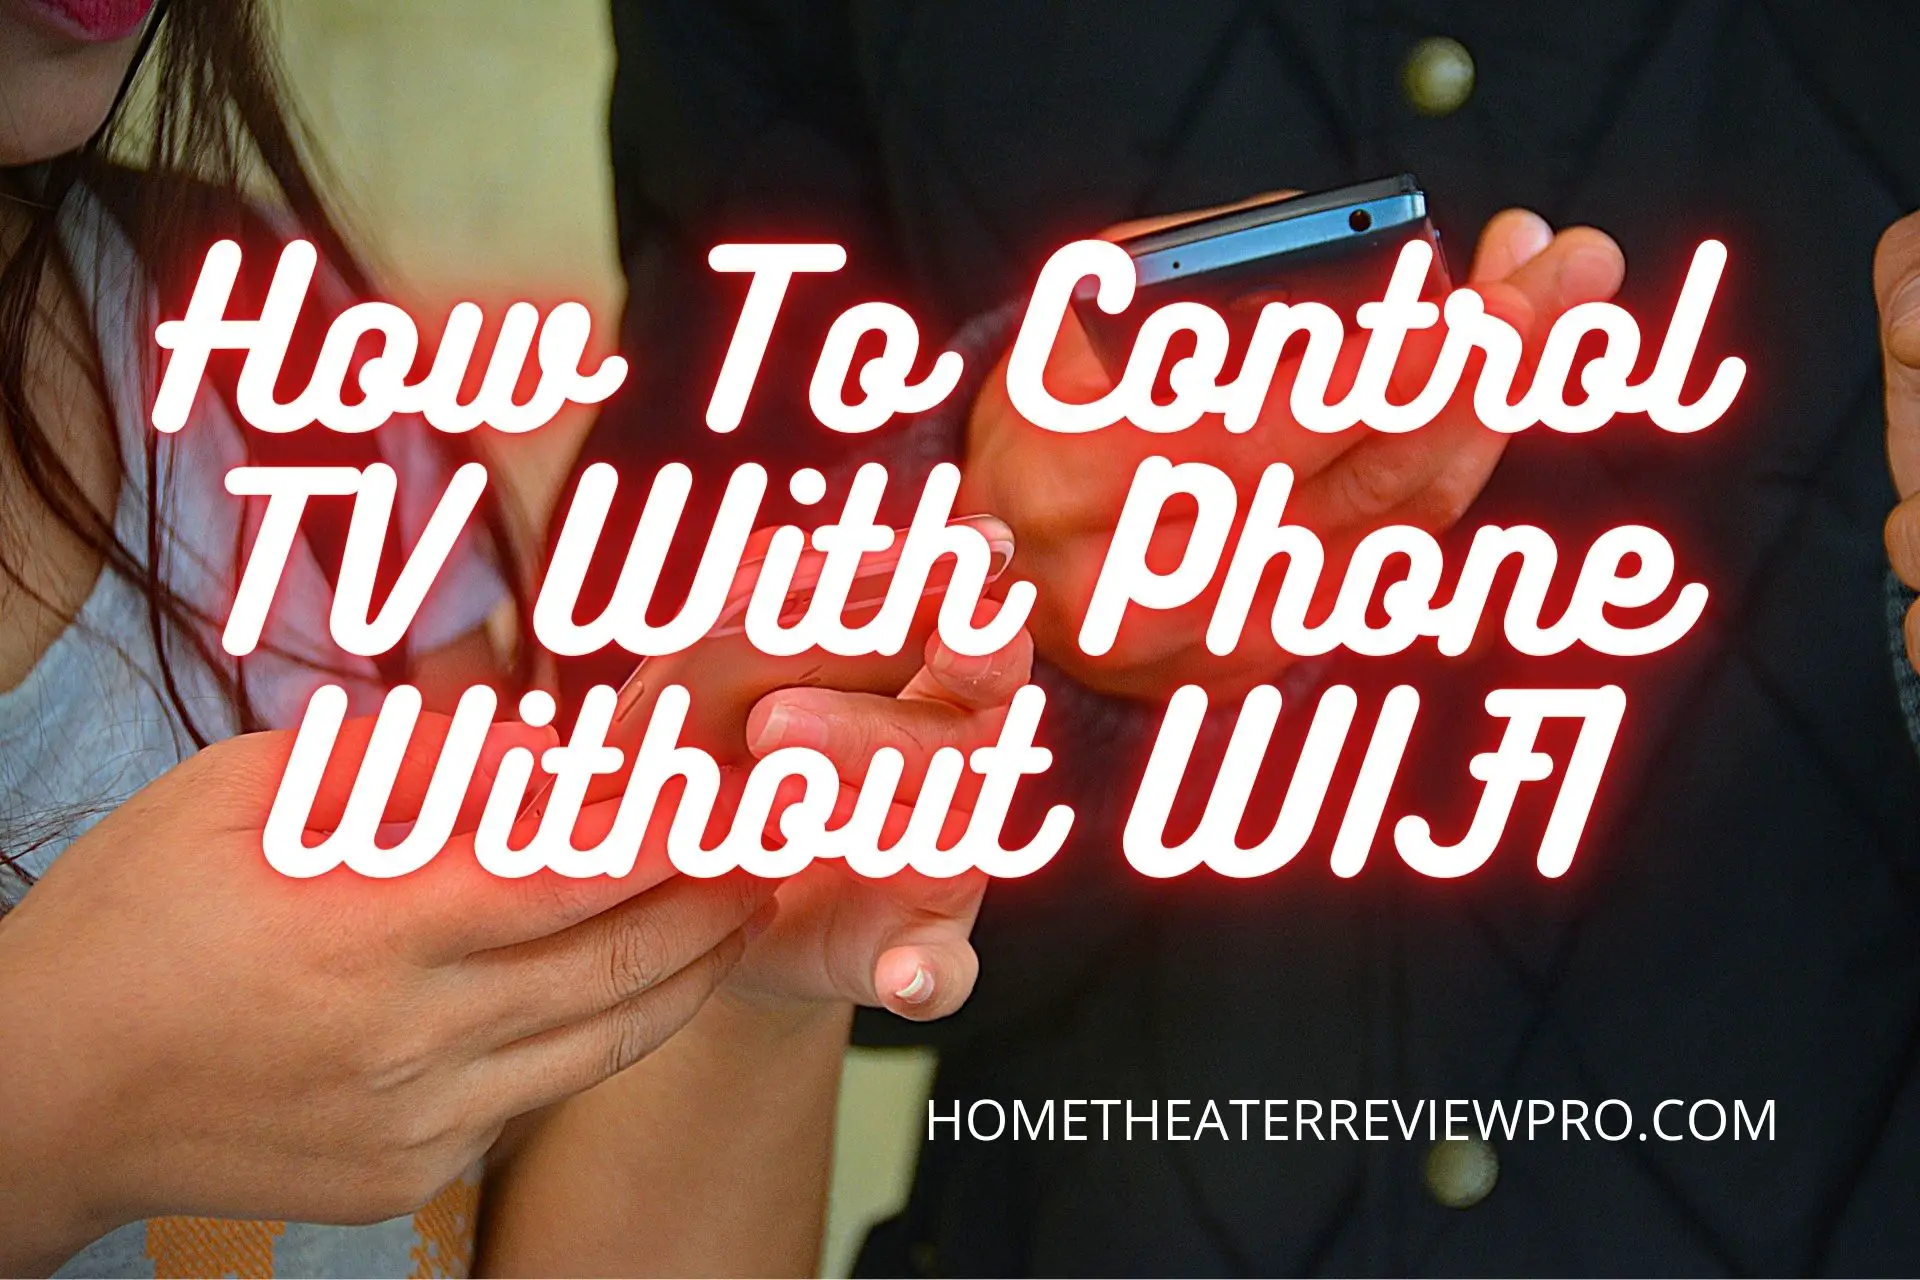 technical director our How To Control TV With Phone Without WIFI - Home Theater Review Pro